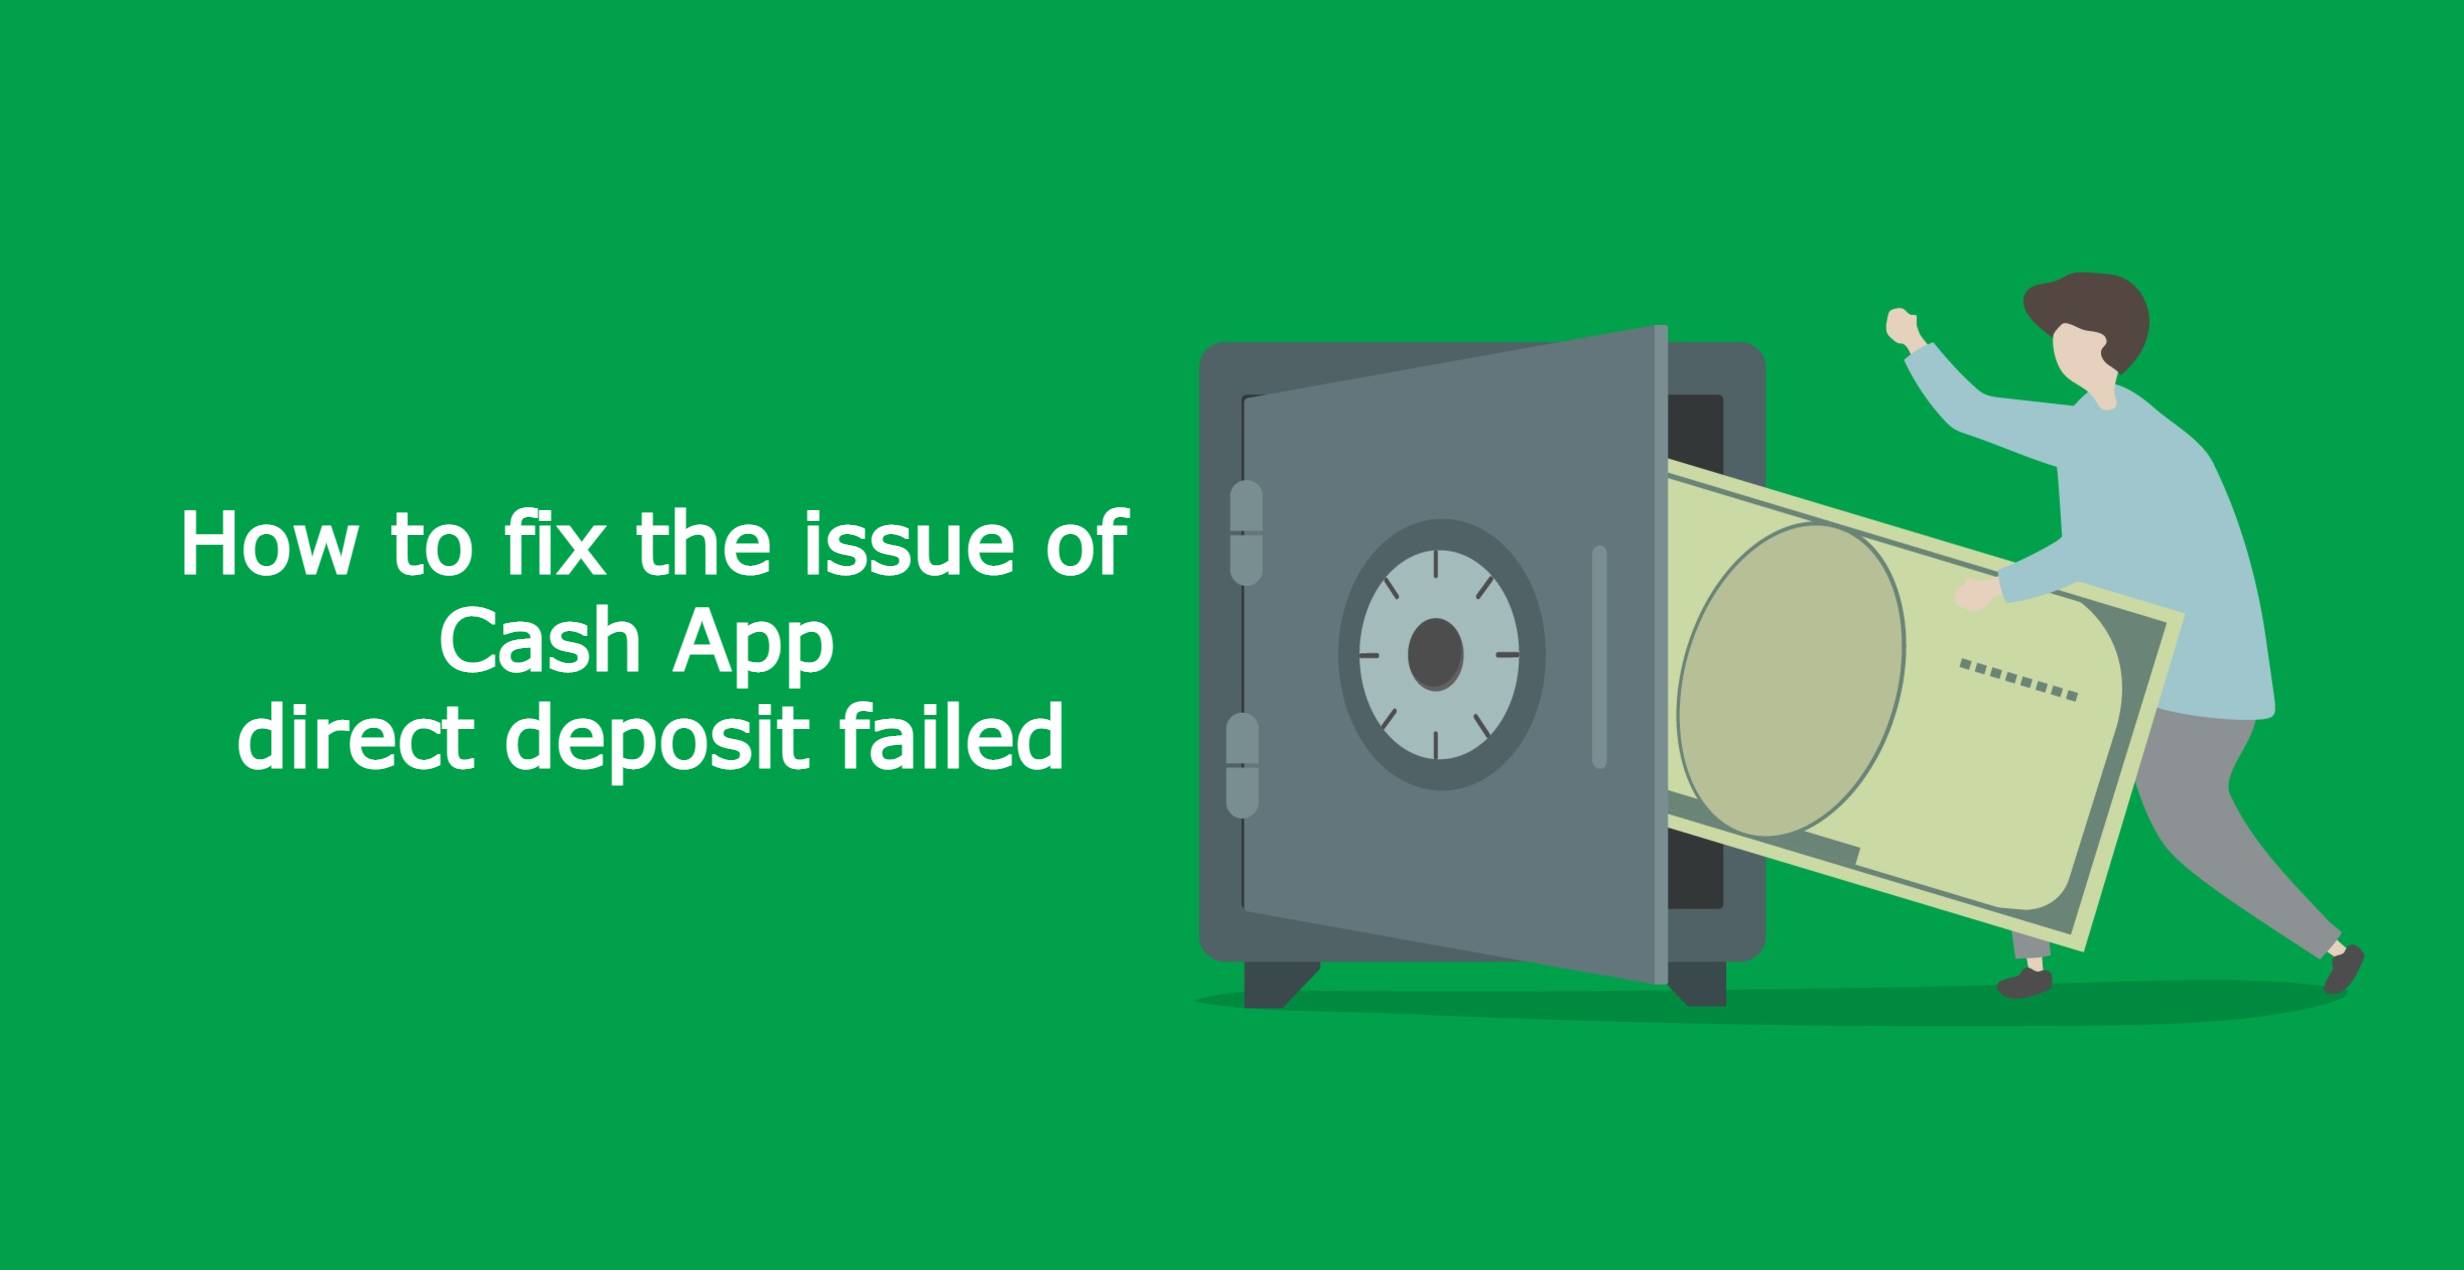 Article about How To fix the issue of Cash App direct deposit failed